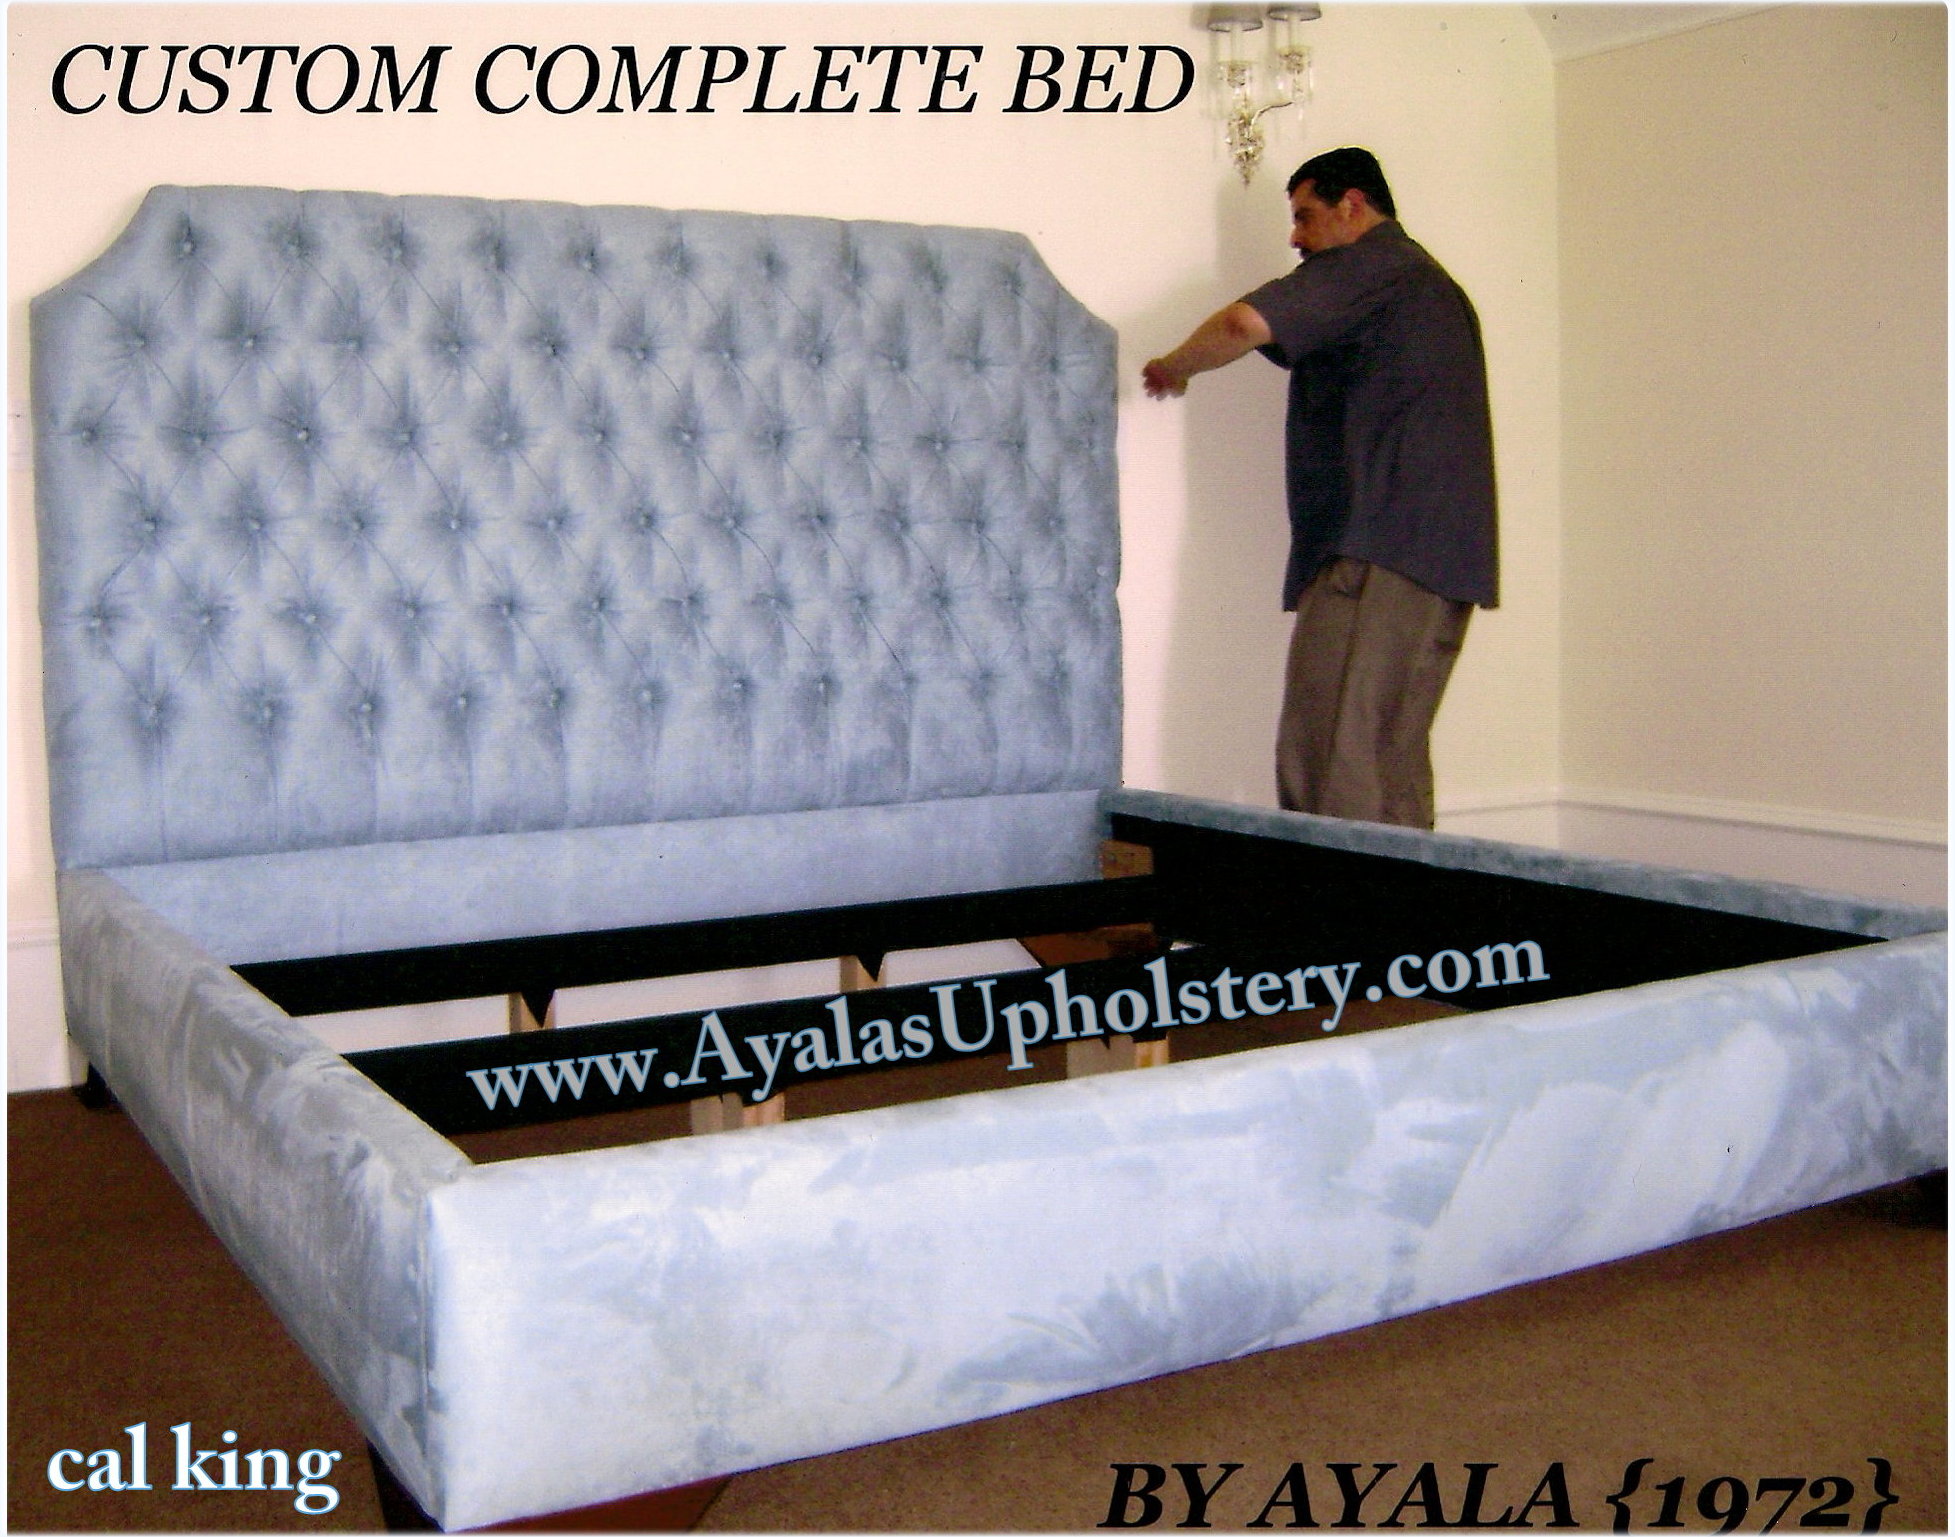 Beds Cal-King Complete Bed By Ayalas Upholstery.jpg